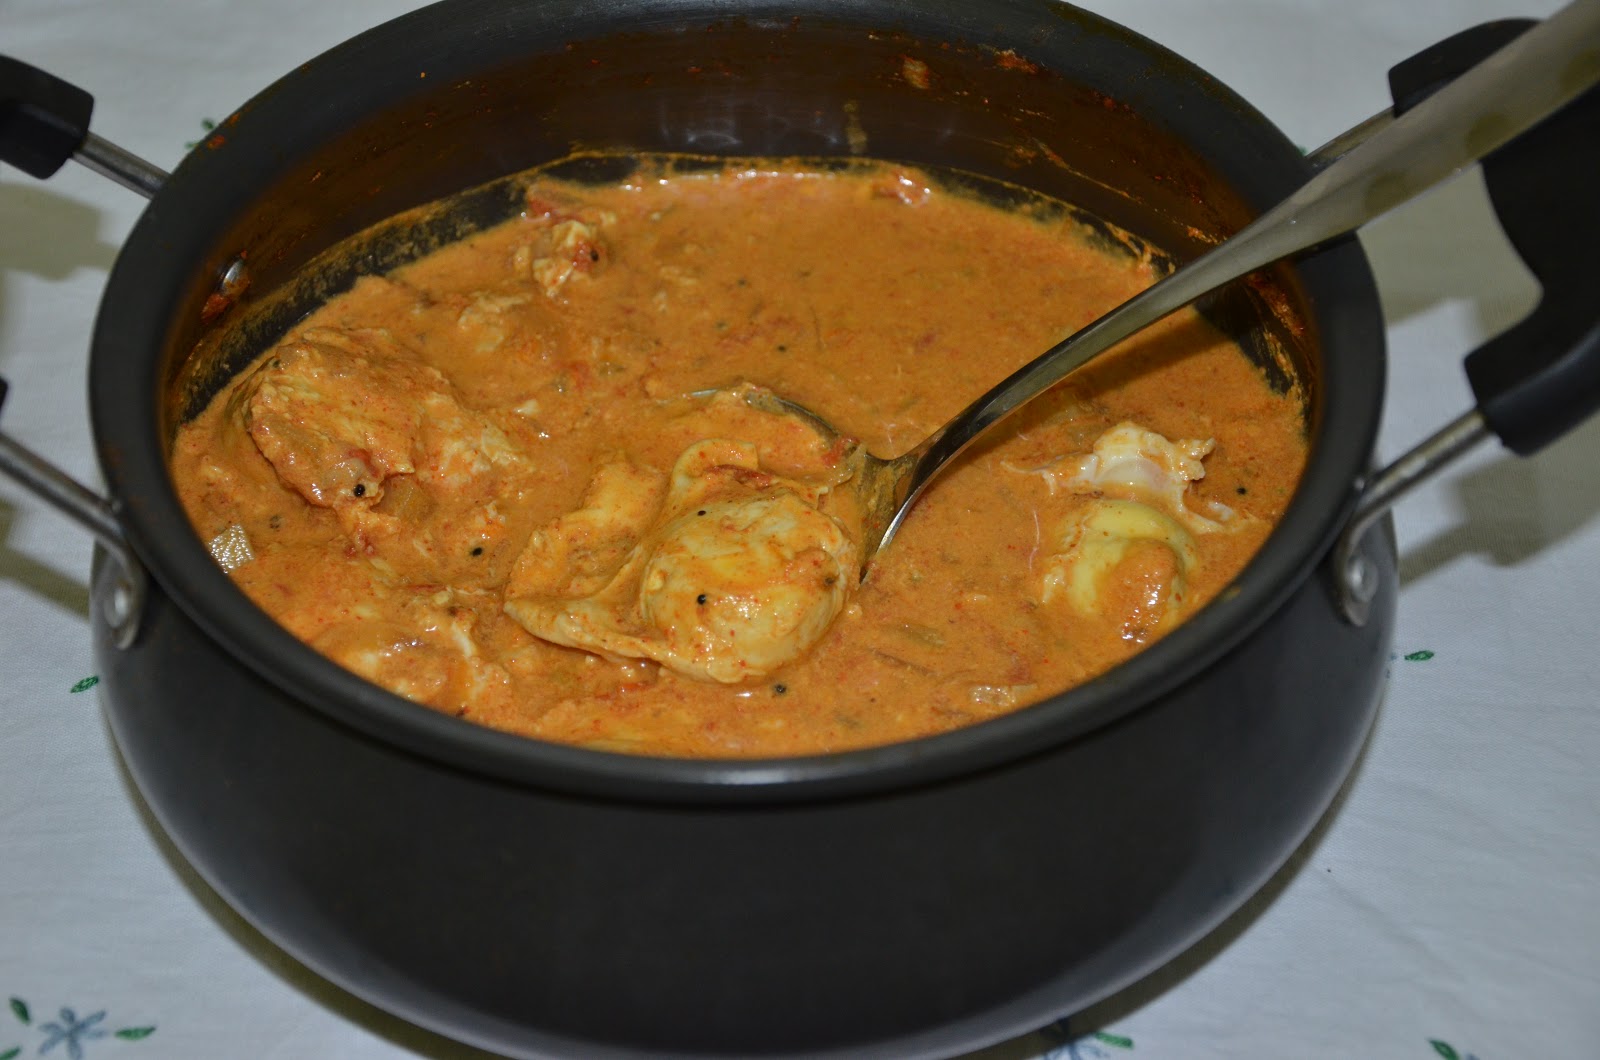 Egg drop curry